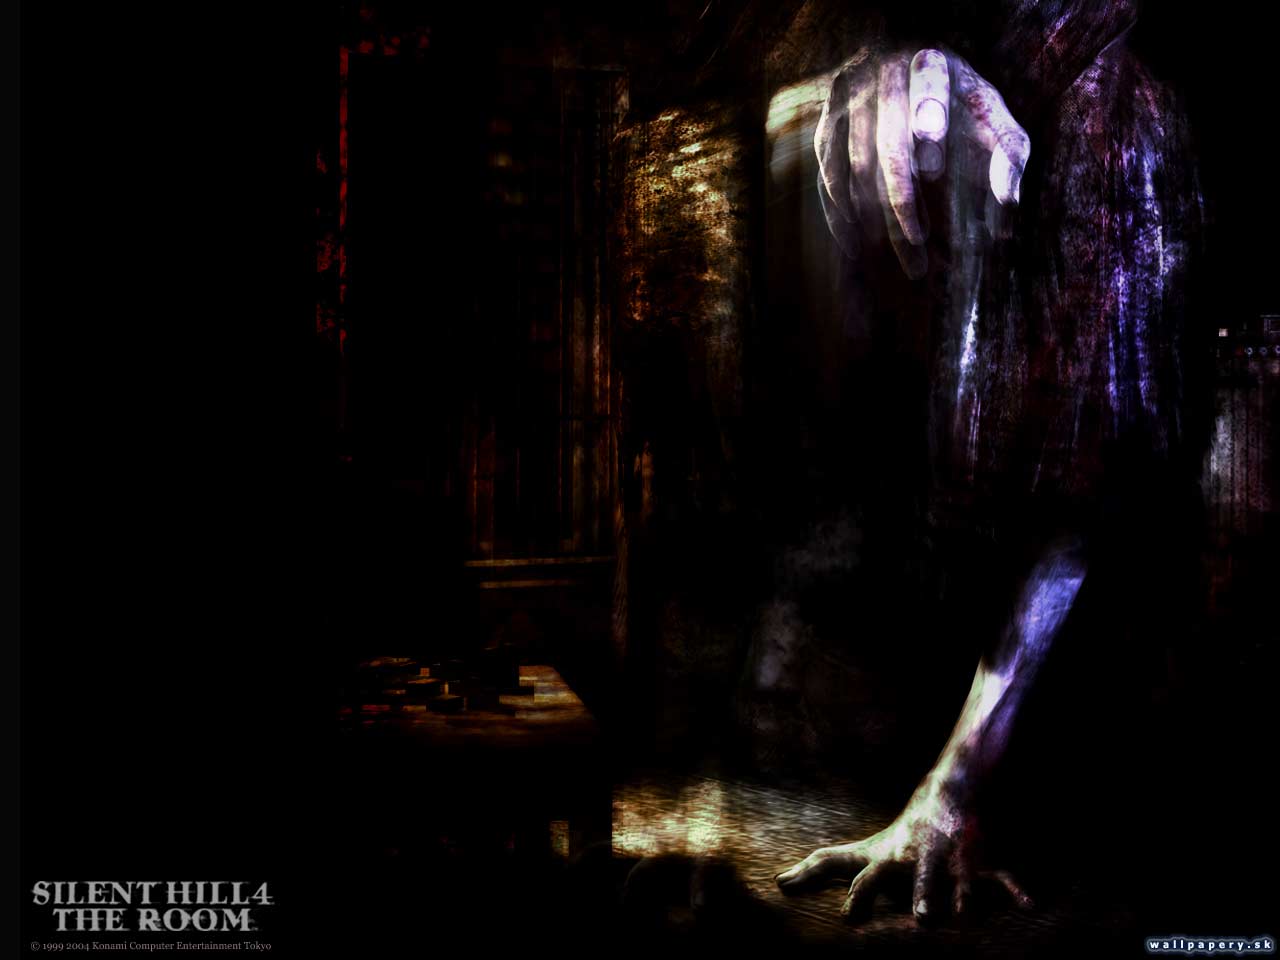 Silent Hill 4: The Room - wallpaper 2